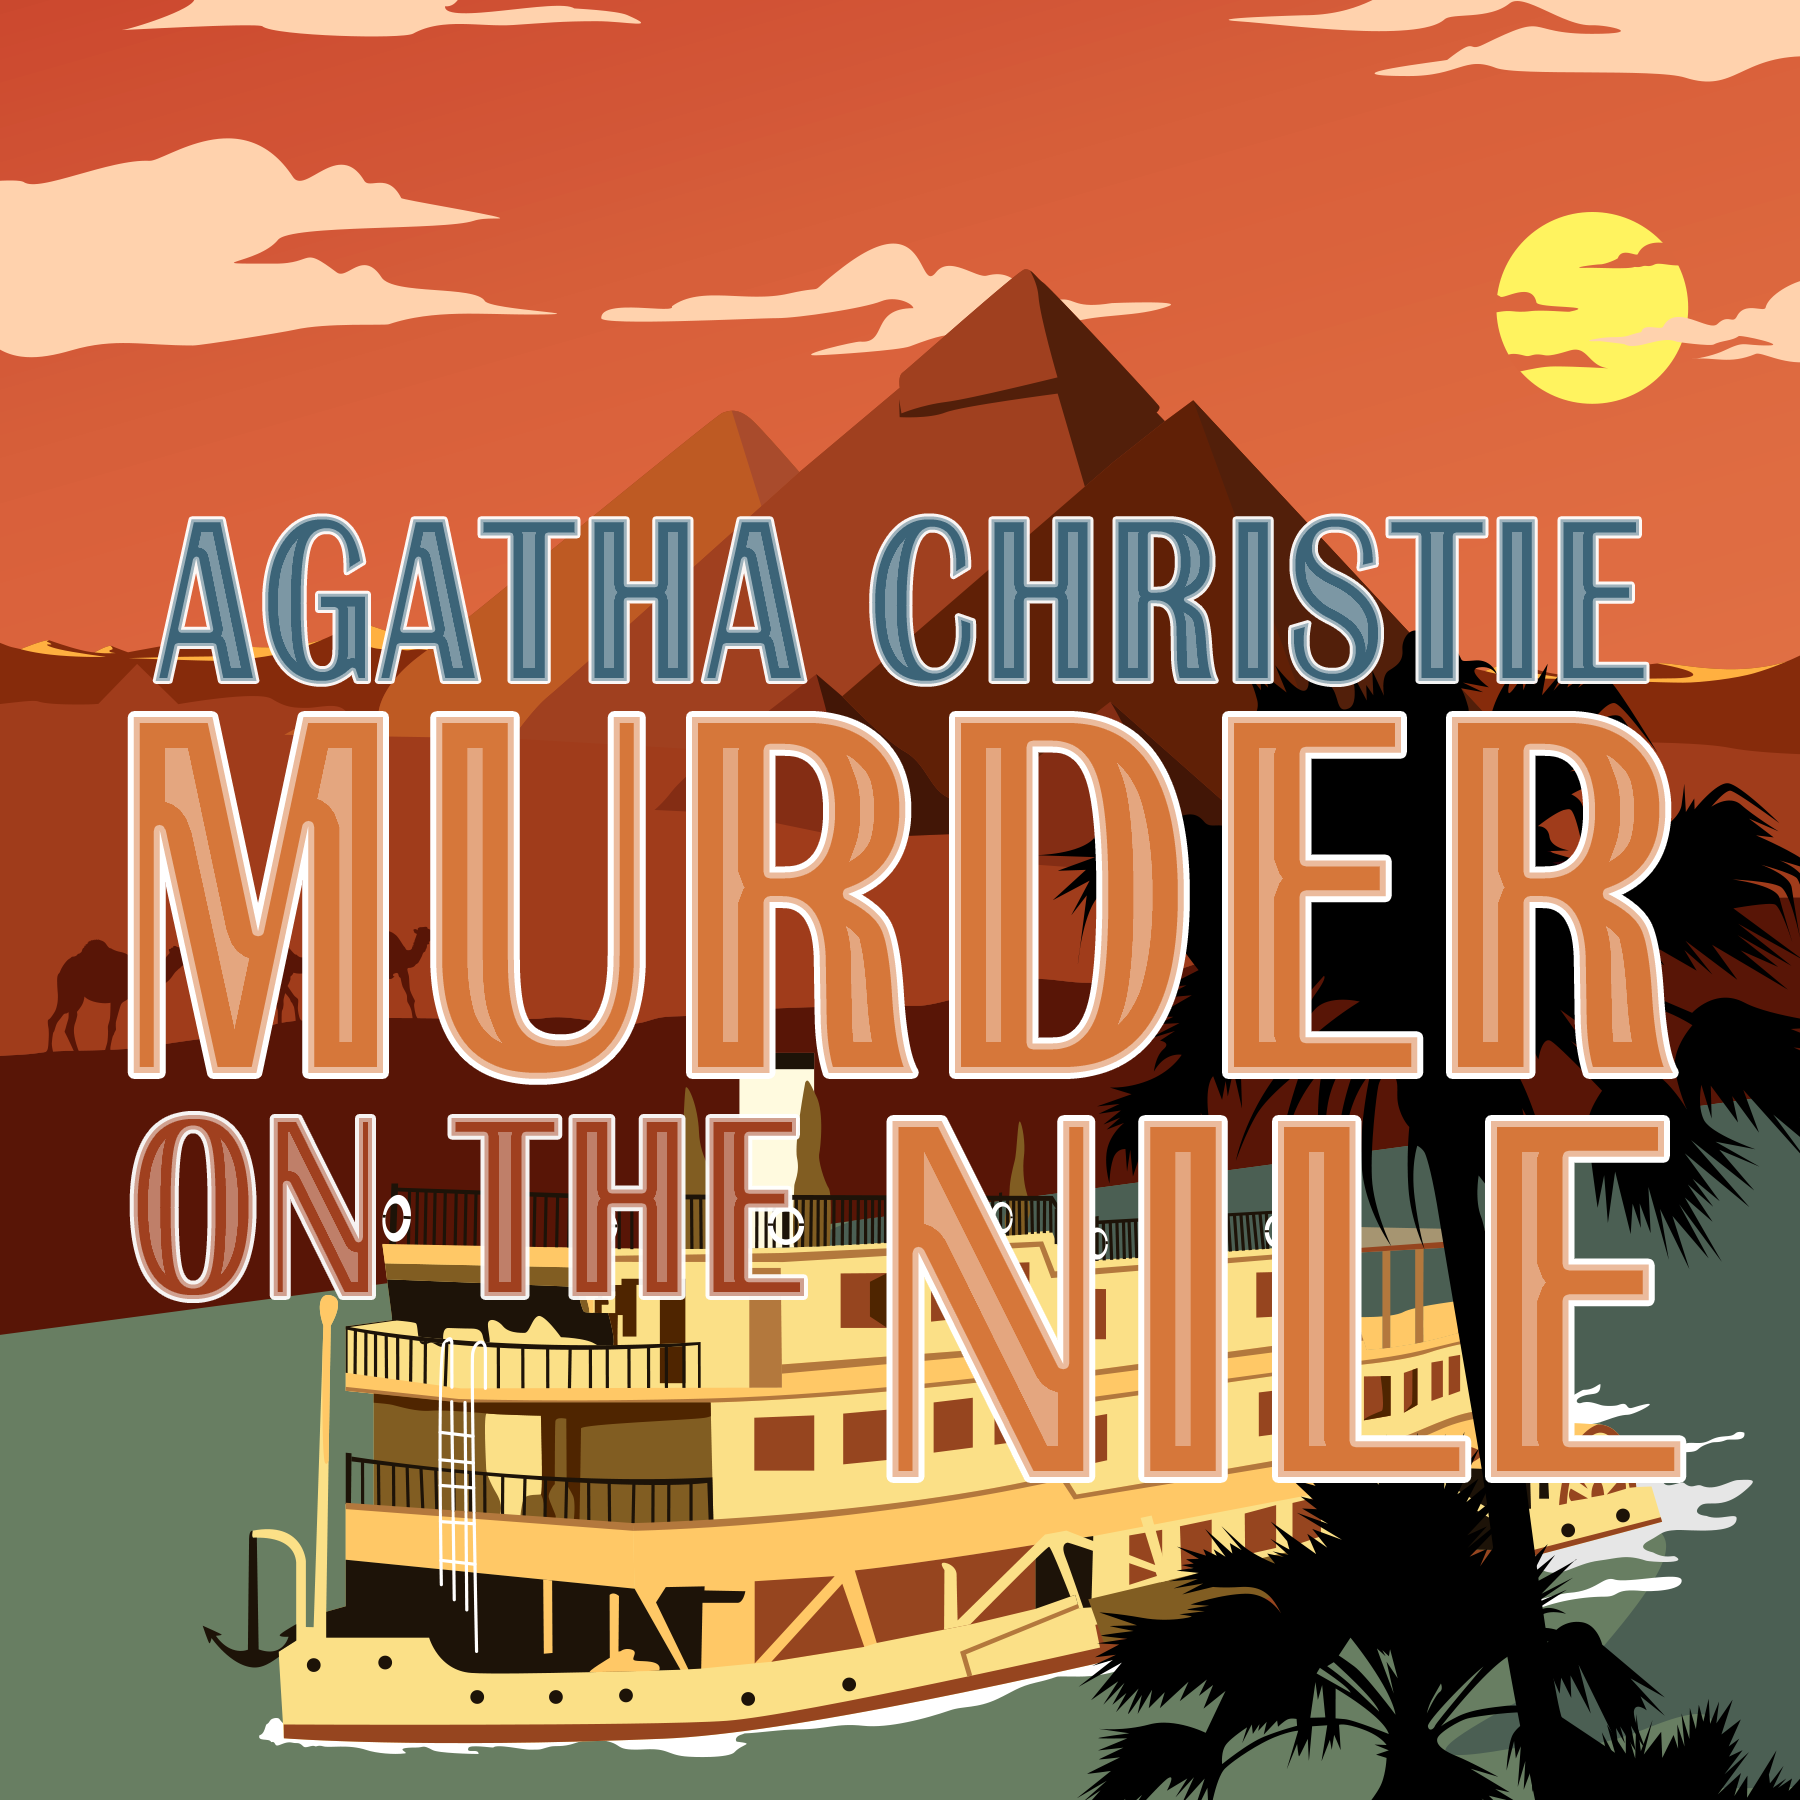 Artwork for Murder on the Nile by Agatha Christie